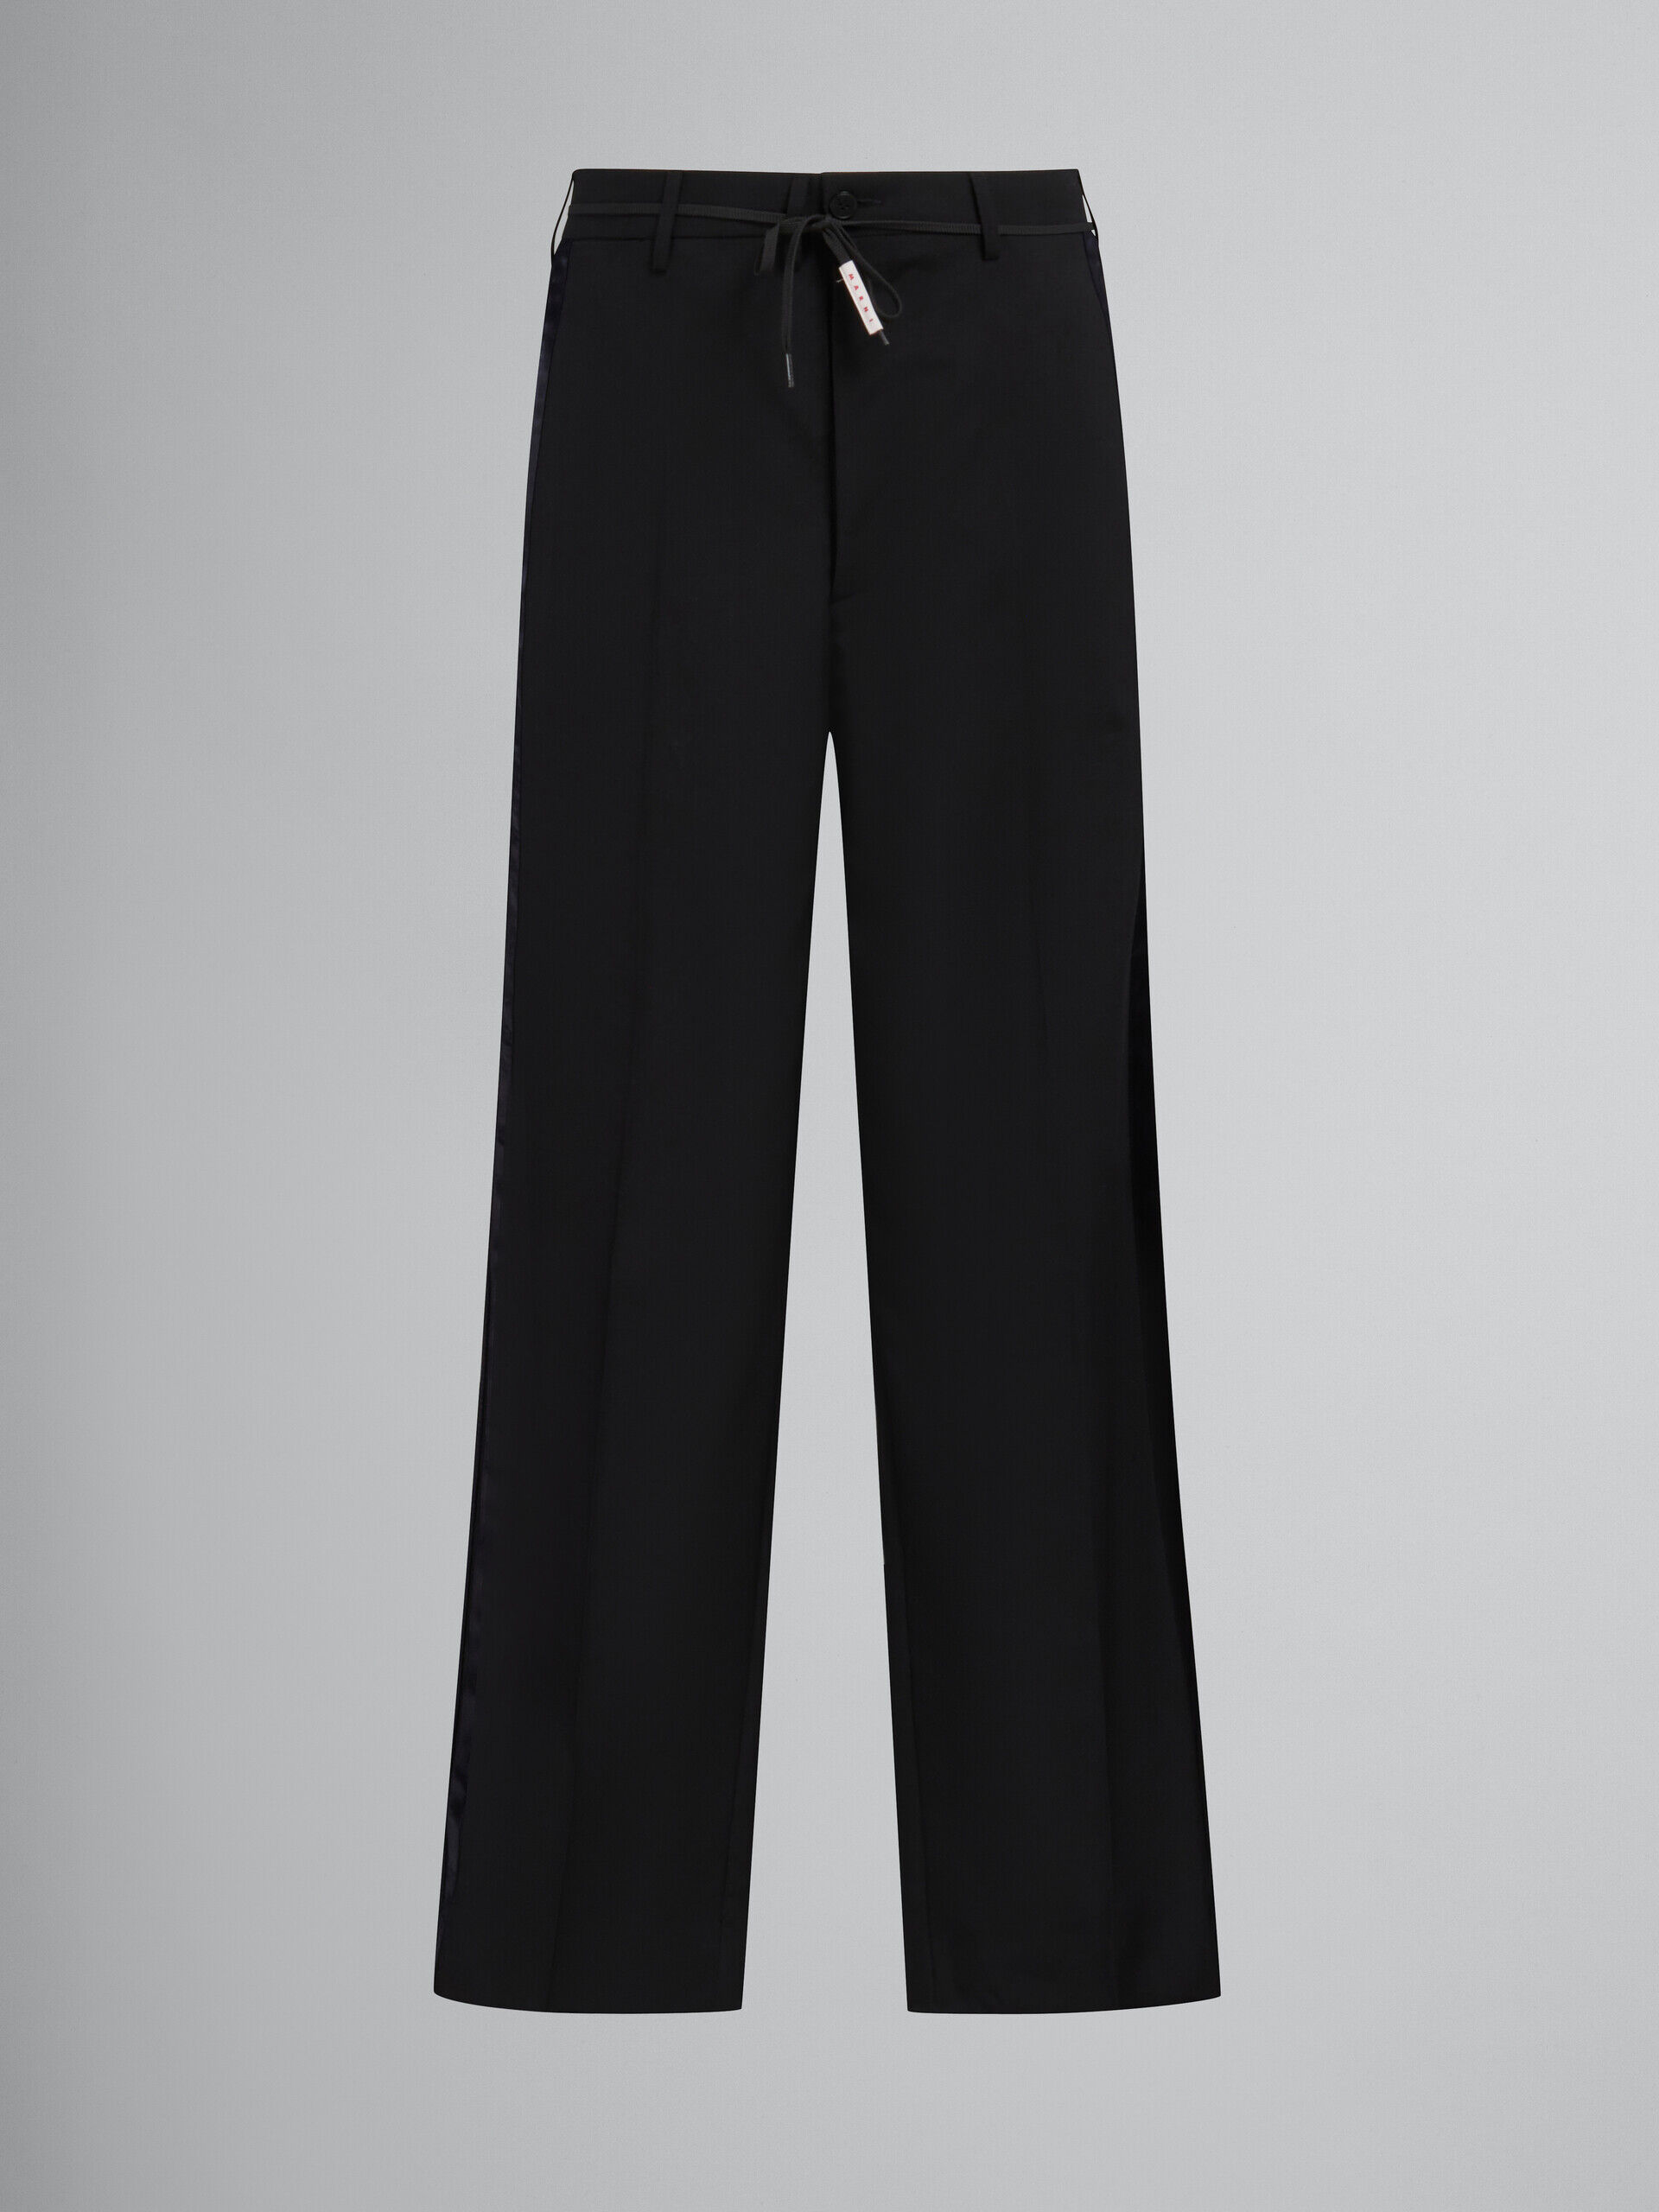 Black tropical wool trousers with satin stripes | Marni